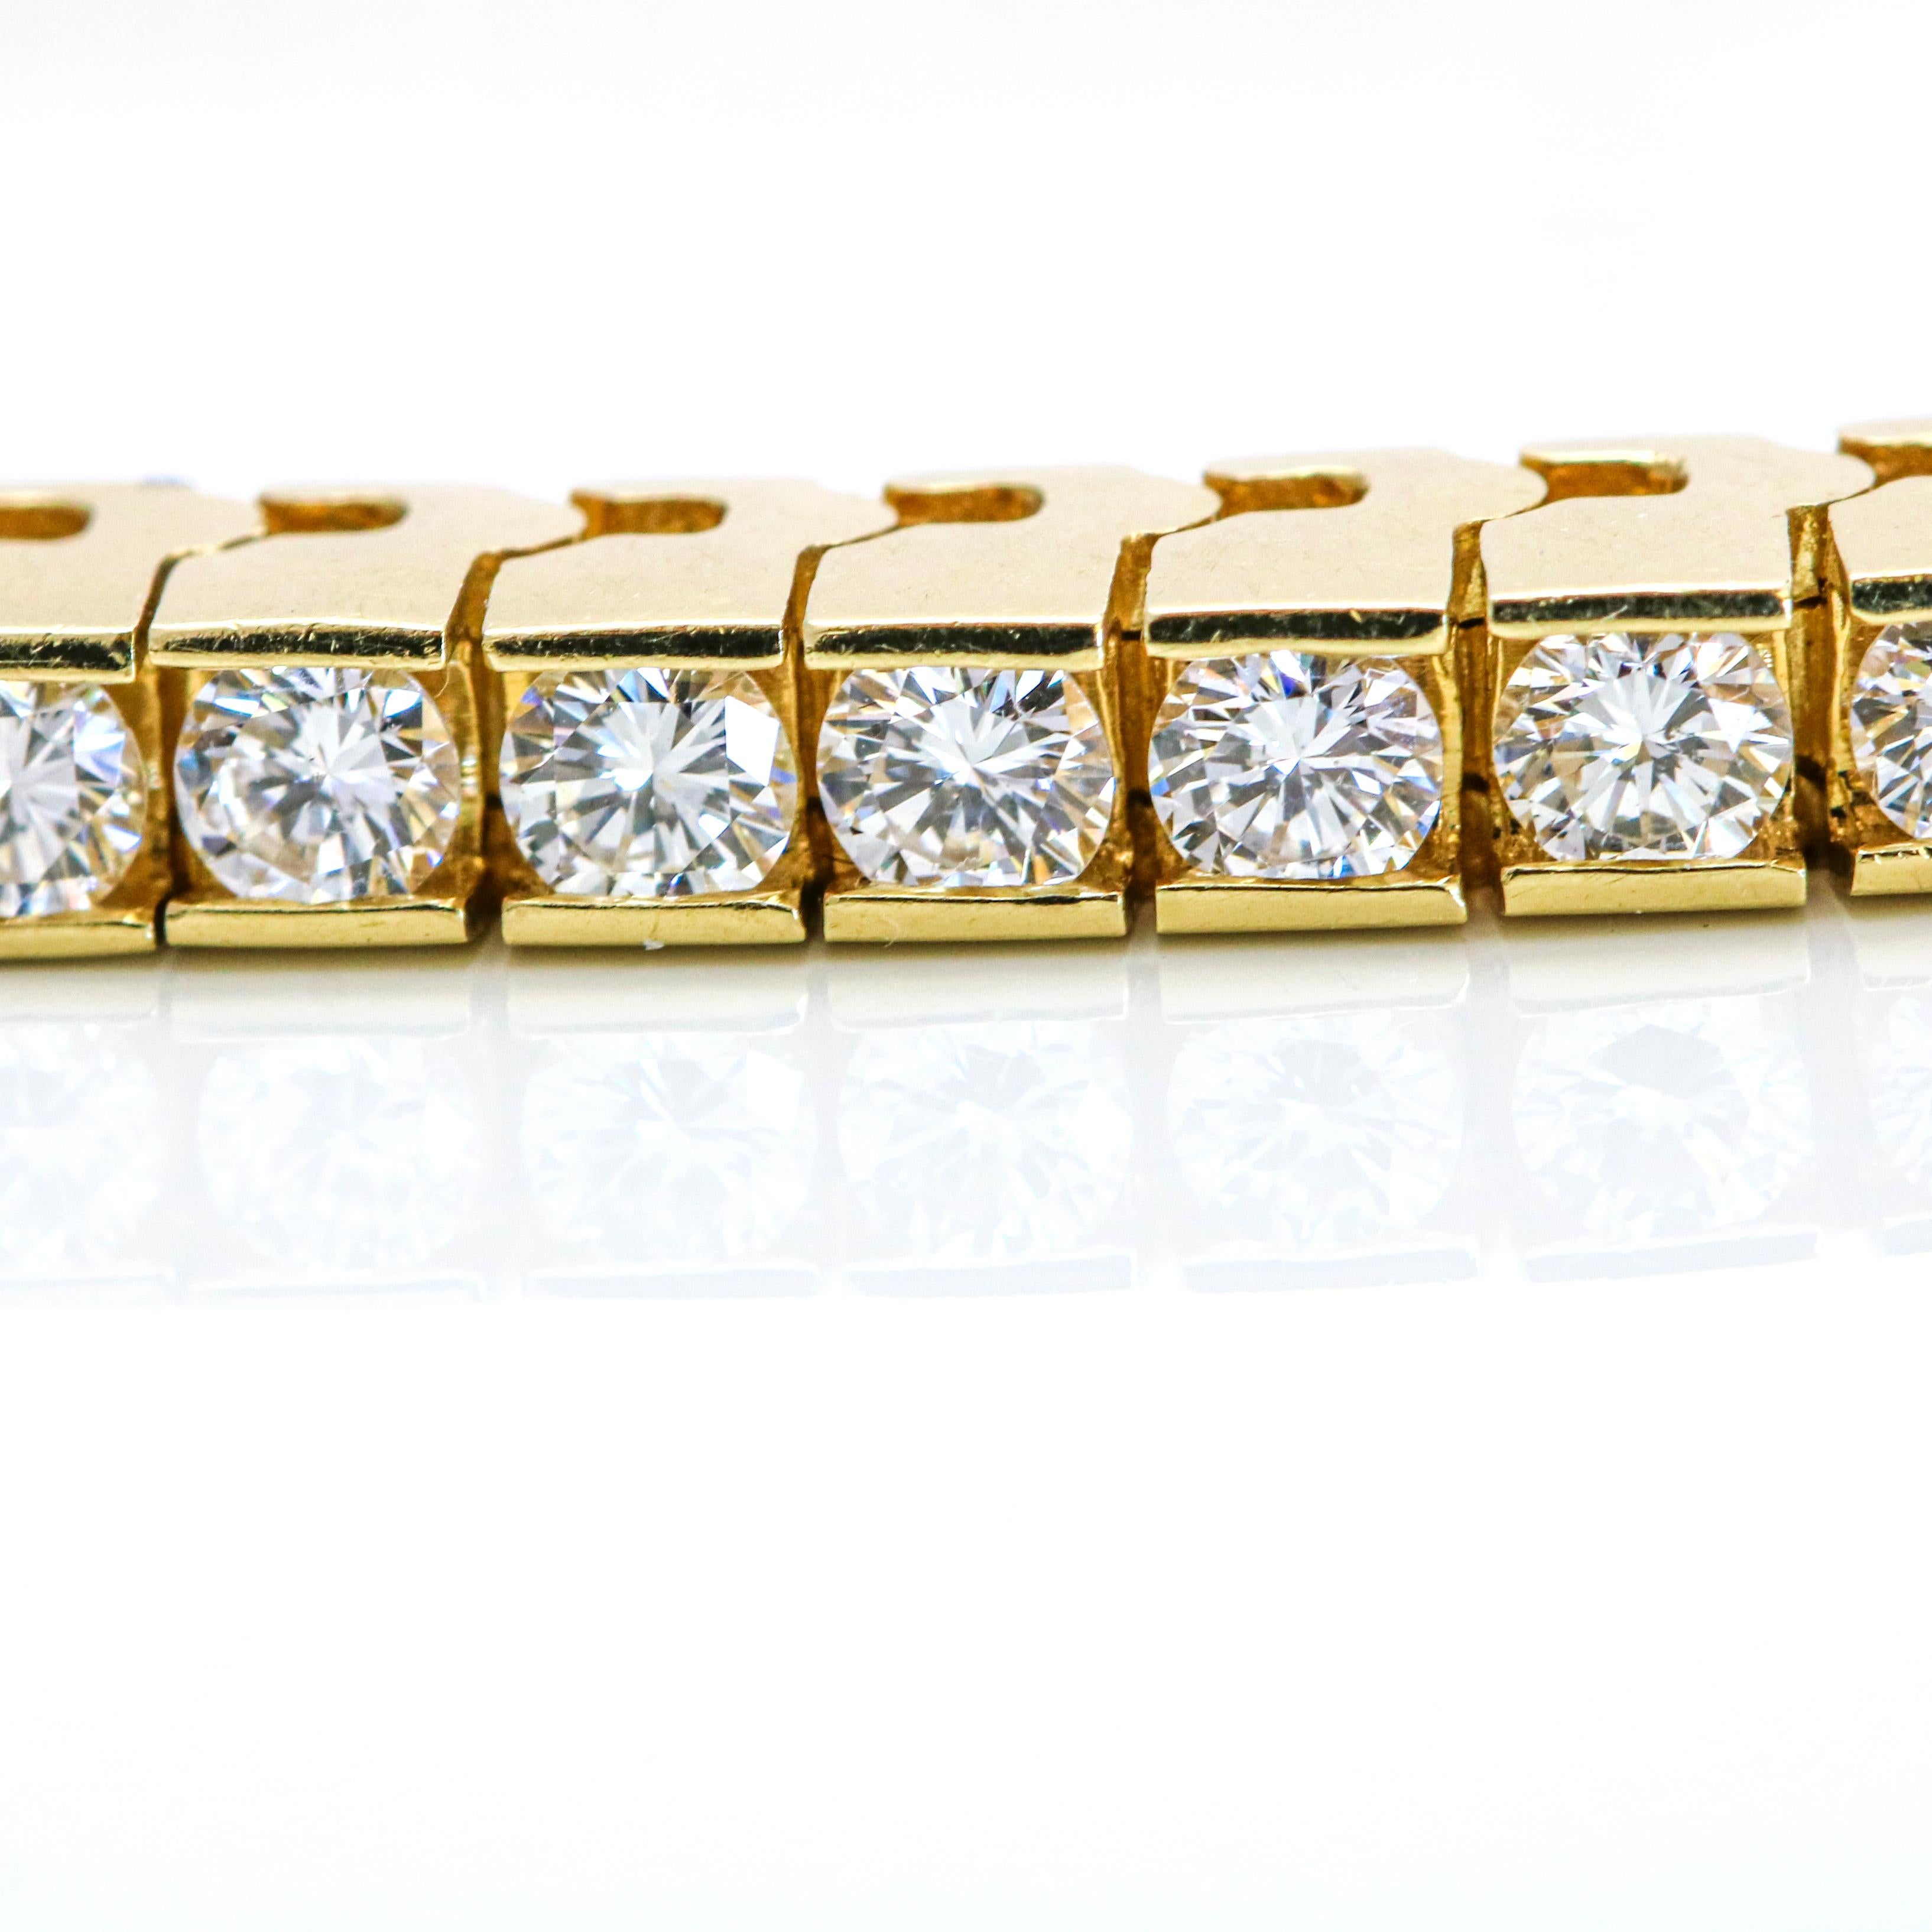 Classic diamond line bracelet in 14-karat yellow gold. The bracelet is channel set with 63 near colorless round brilliant cut diamonds. Slide clasp with safety.

Size, Medium
Length, 7 inches